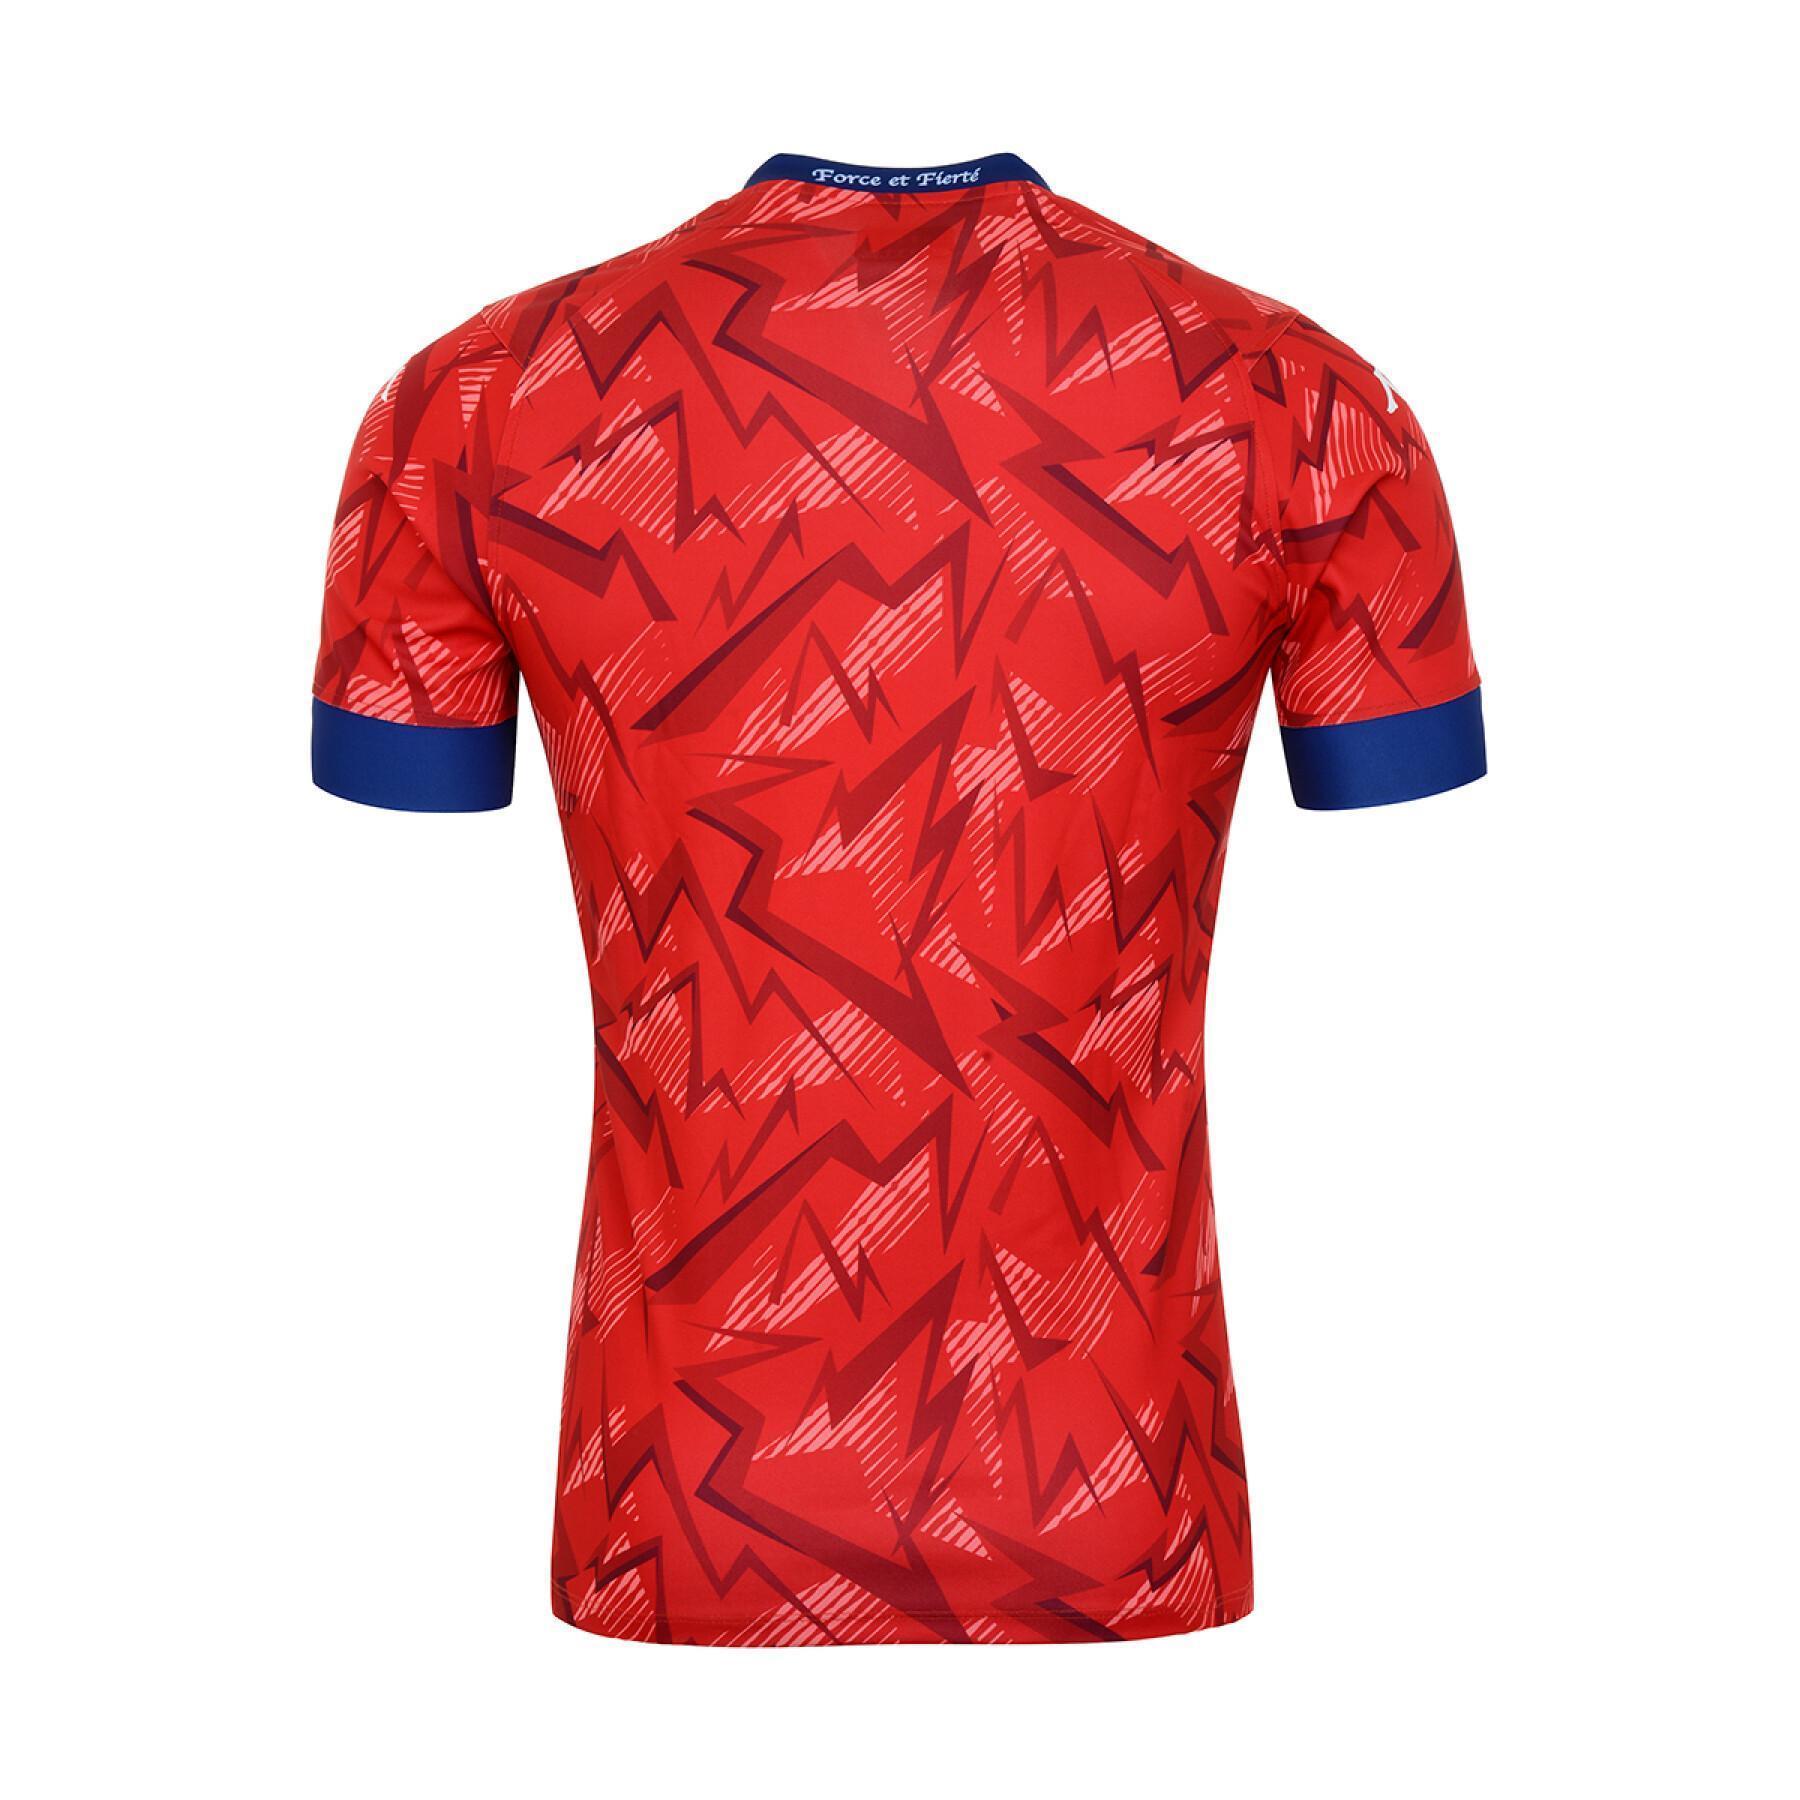 Outdoor jersey FC Grenoble Rugby 2020/21